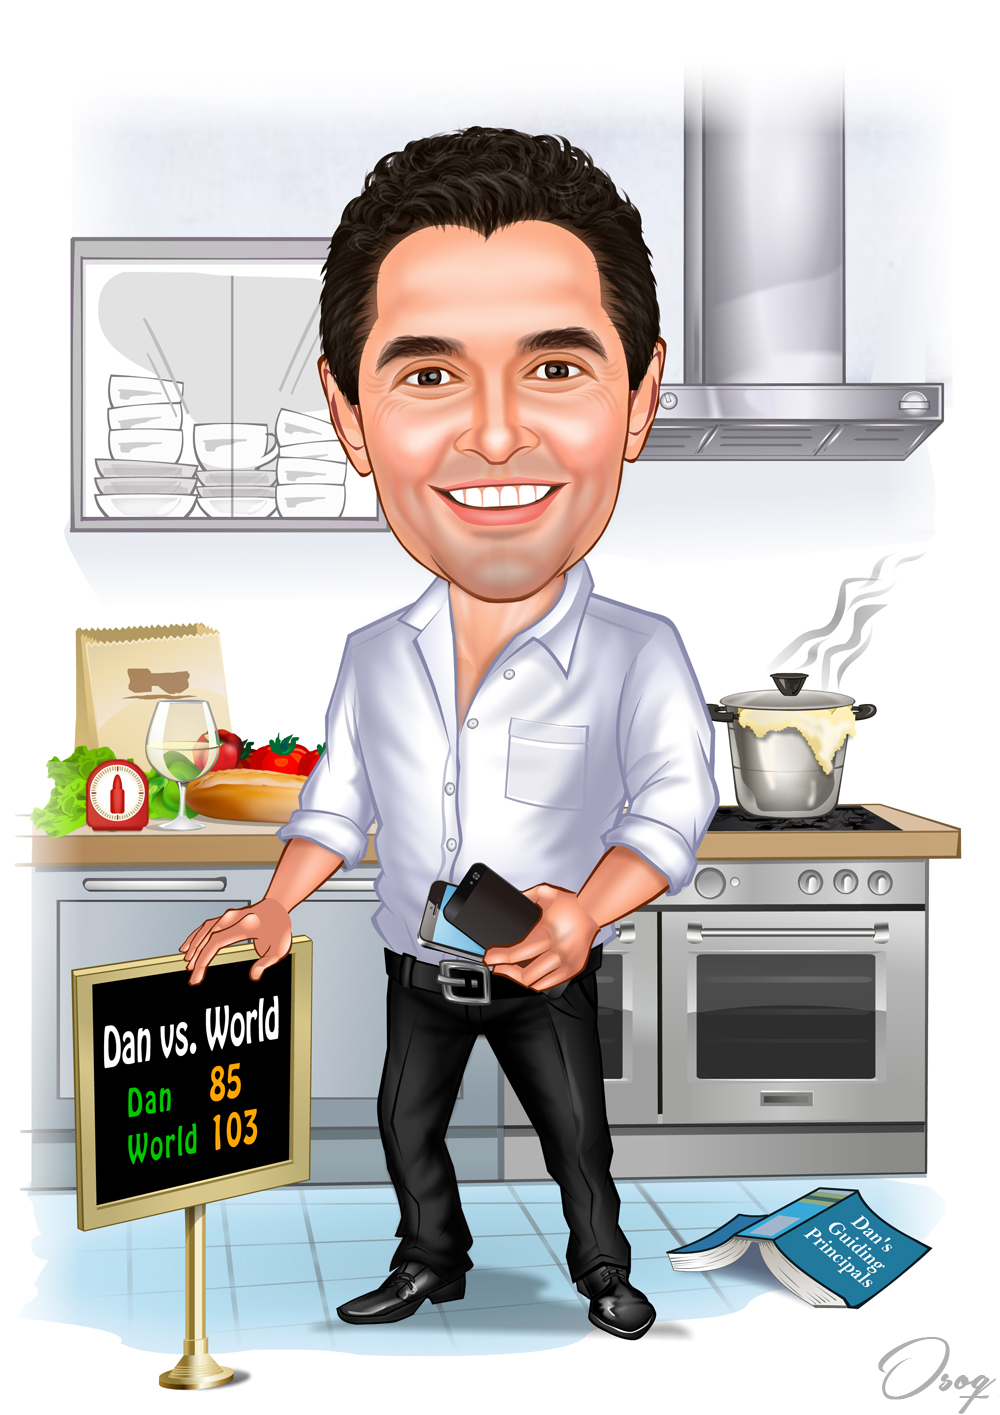 Cooking Photo To Caricature